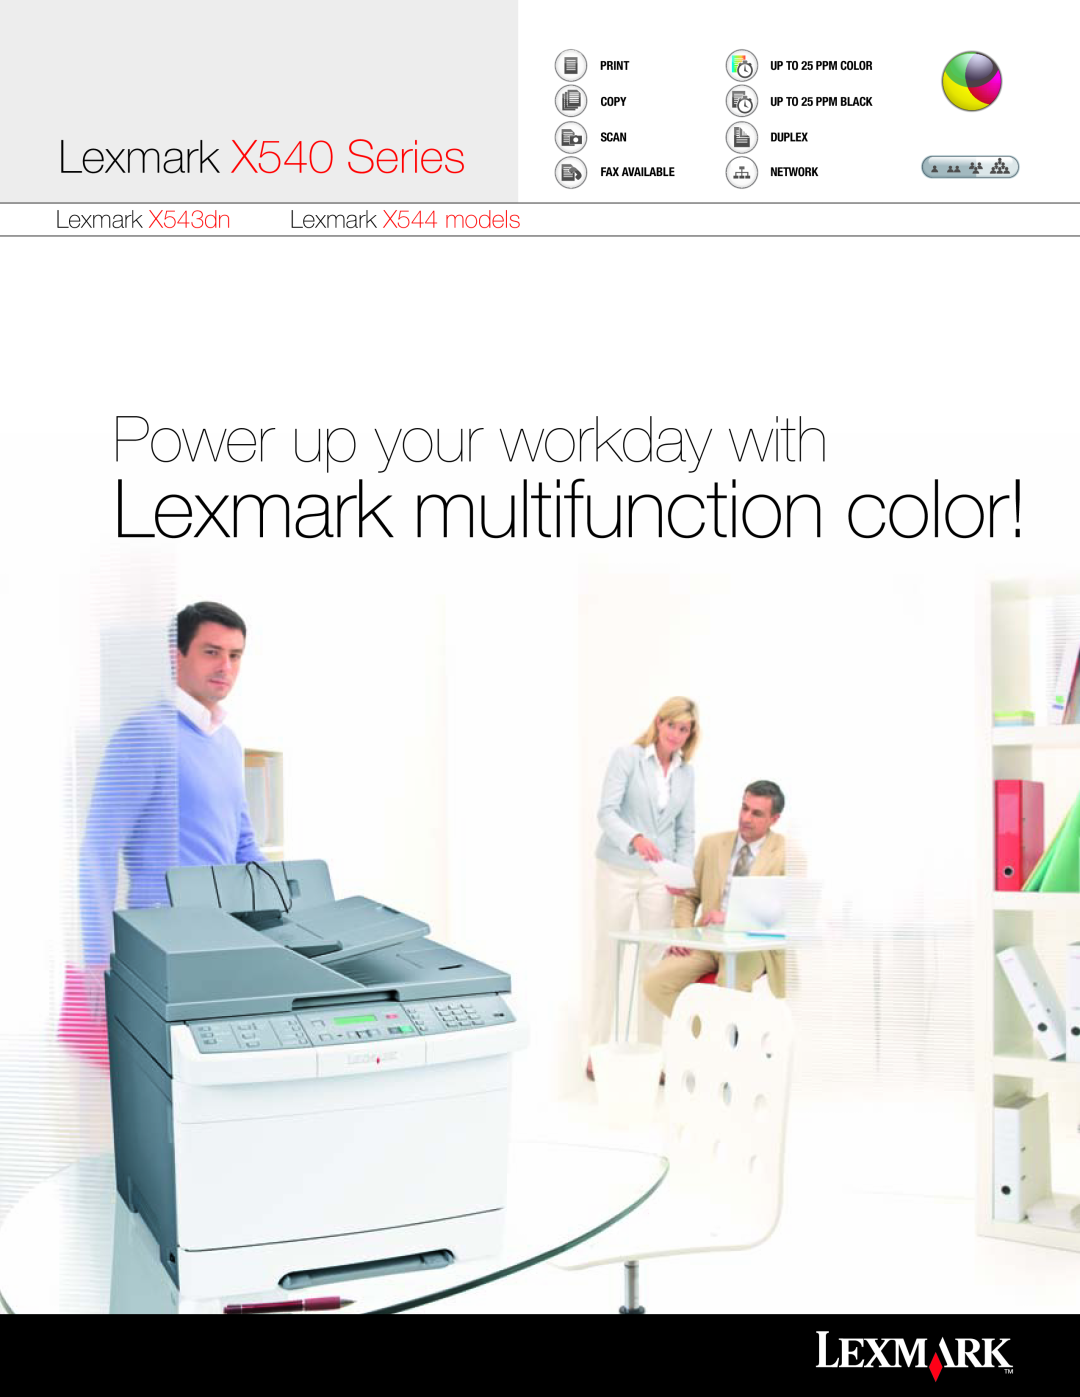 Lexmark manual Lexmark X540 Series, Lexmark multifunction color, Power up your workday with, Lexmark X543dn 